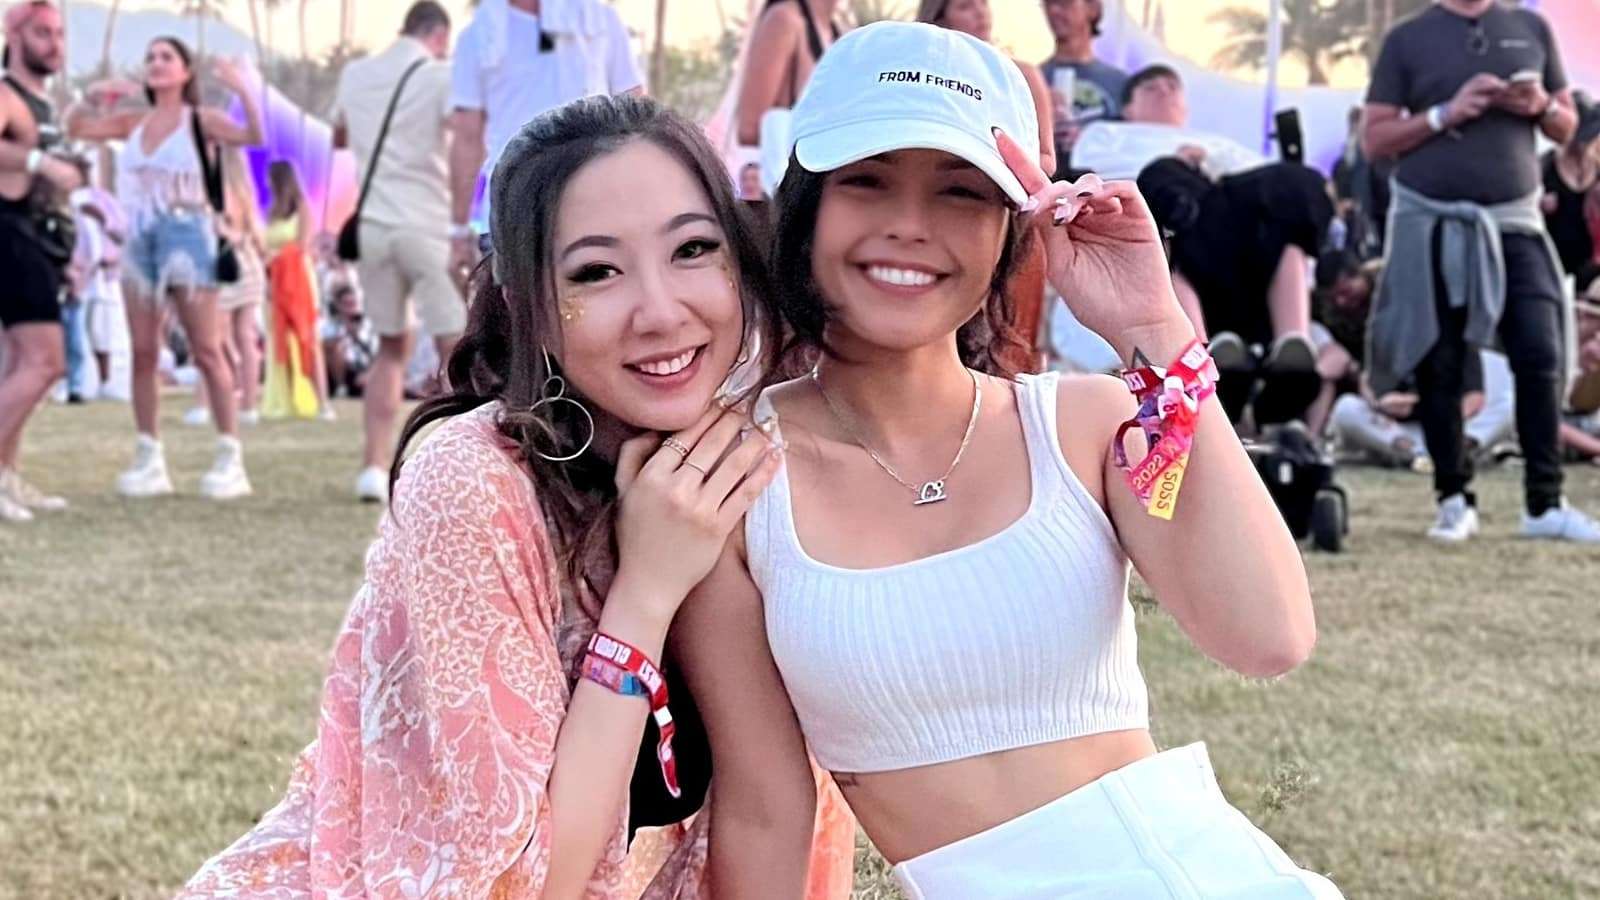 twitch and youtube stars valkyrae and fuslie at coachella music festival